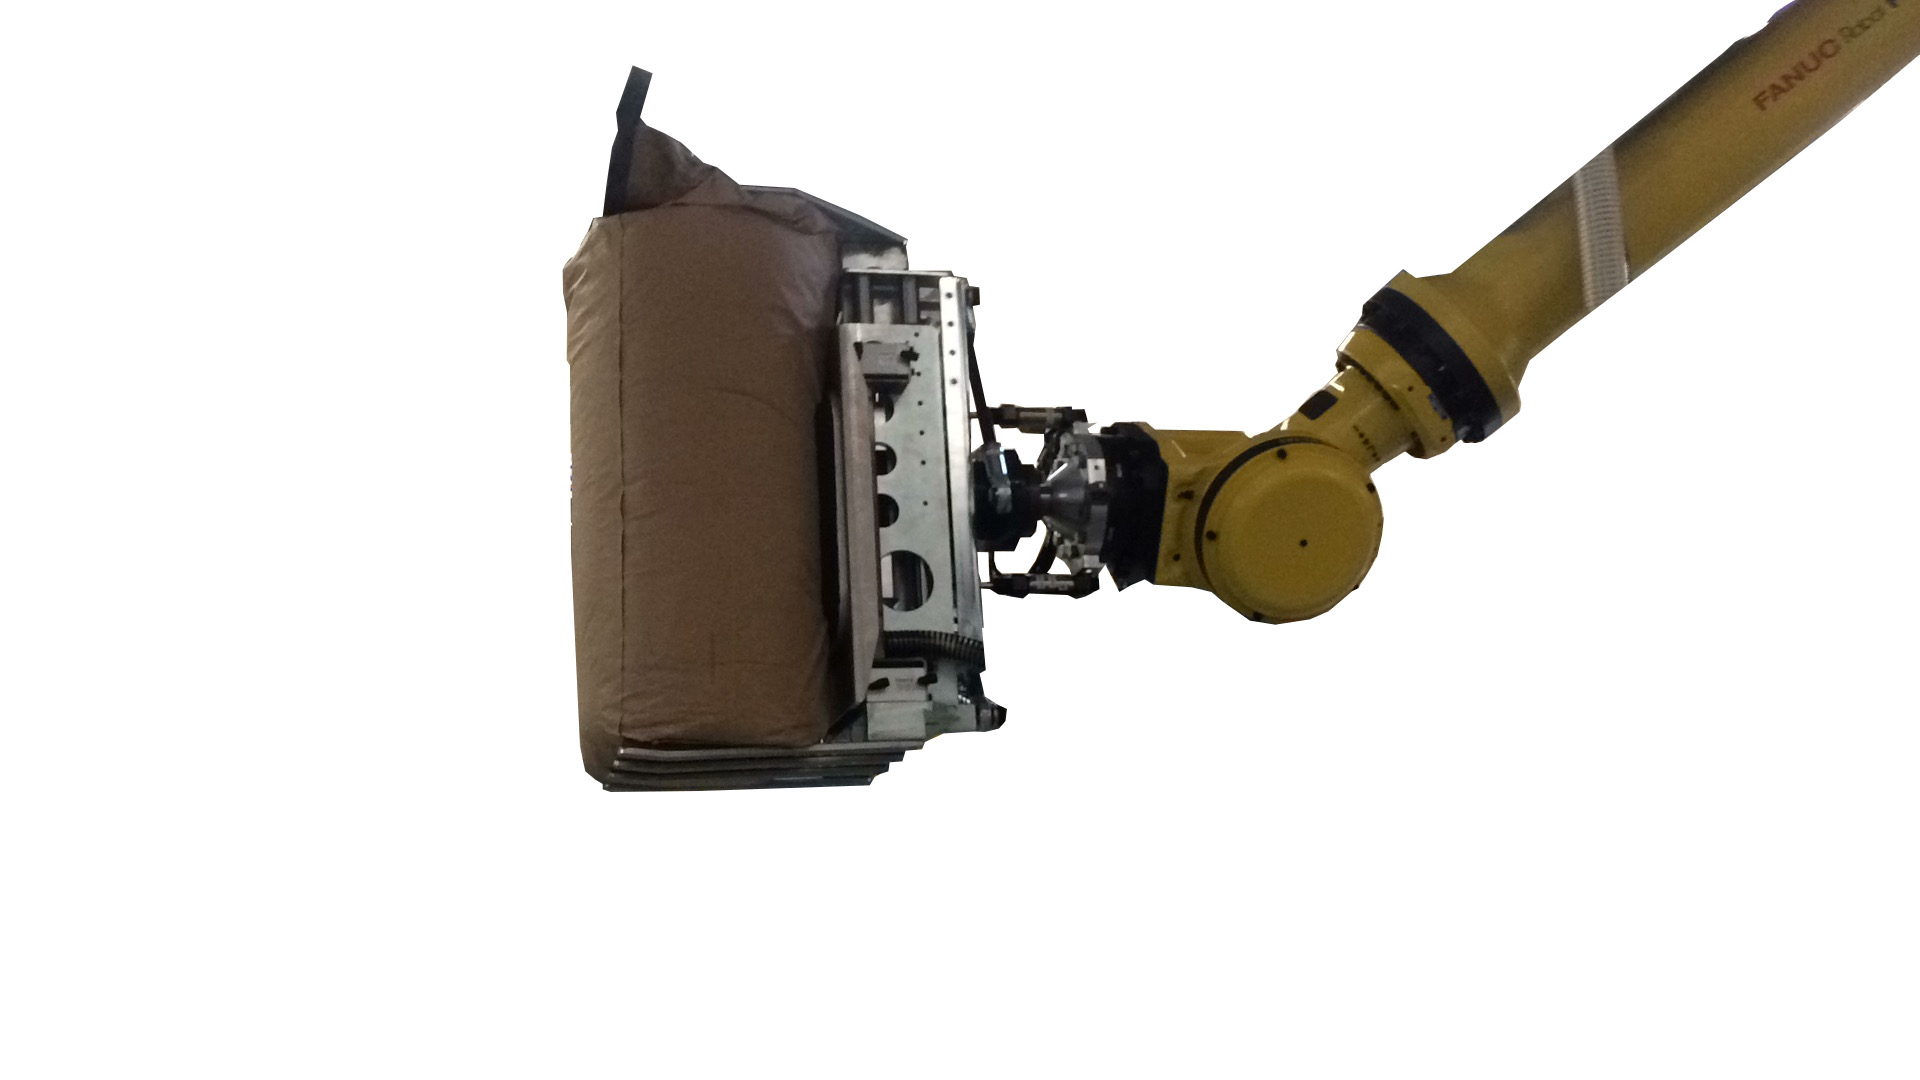 SPECIFIC GRIPPERS FOR ROBOT ARM